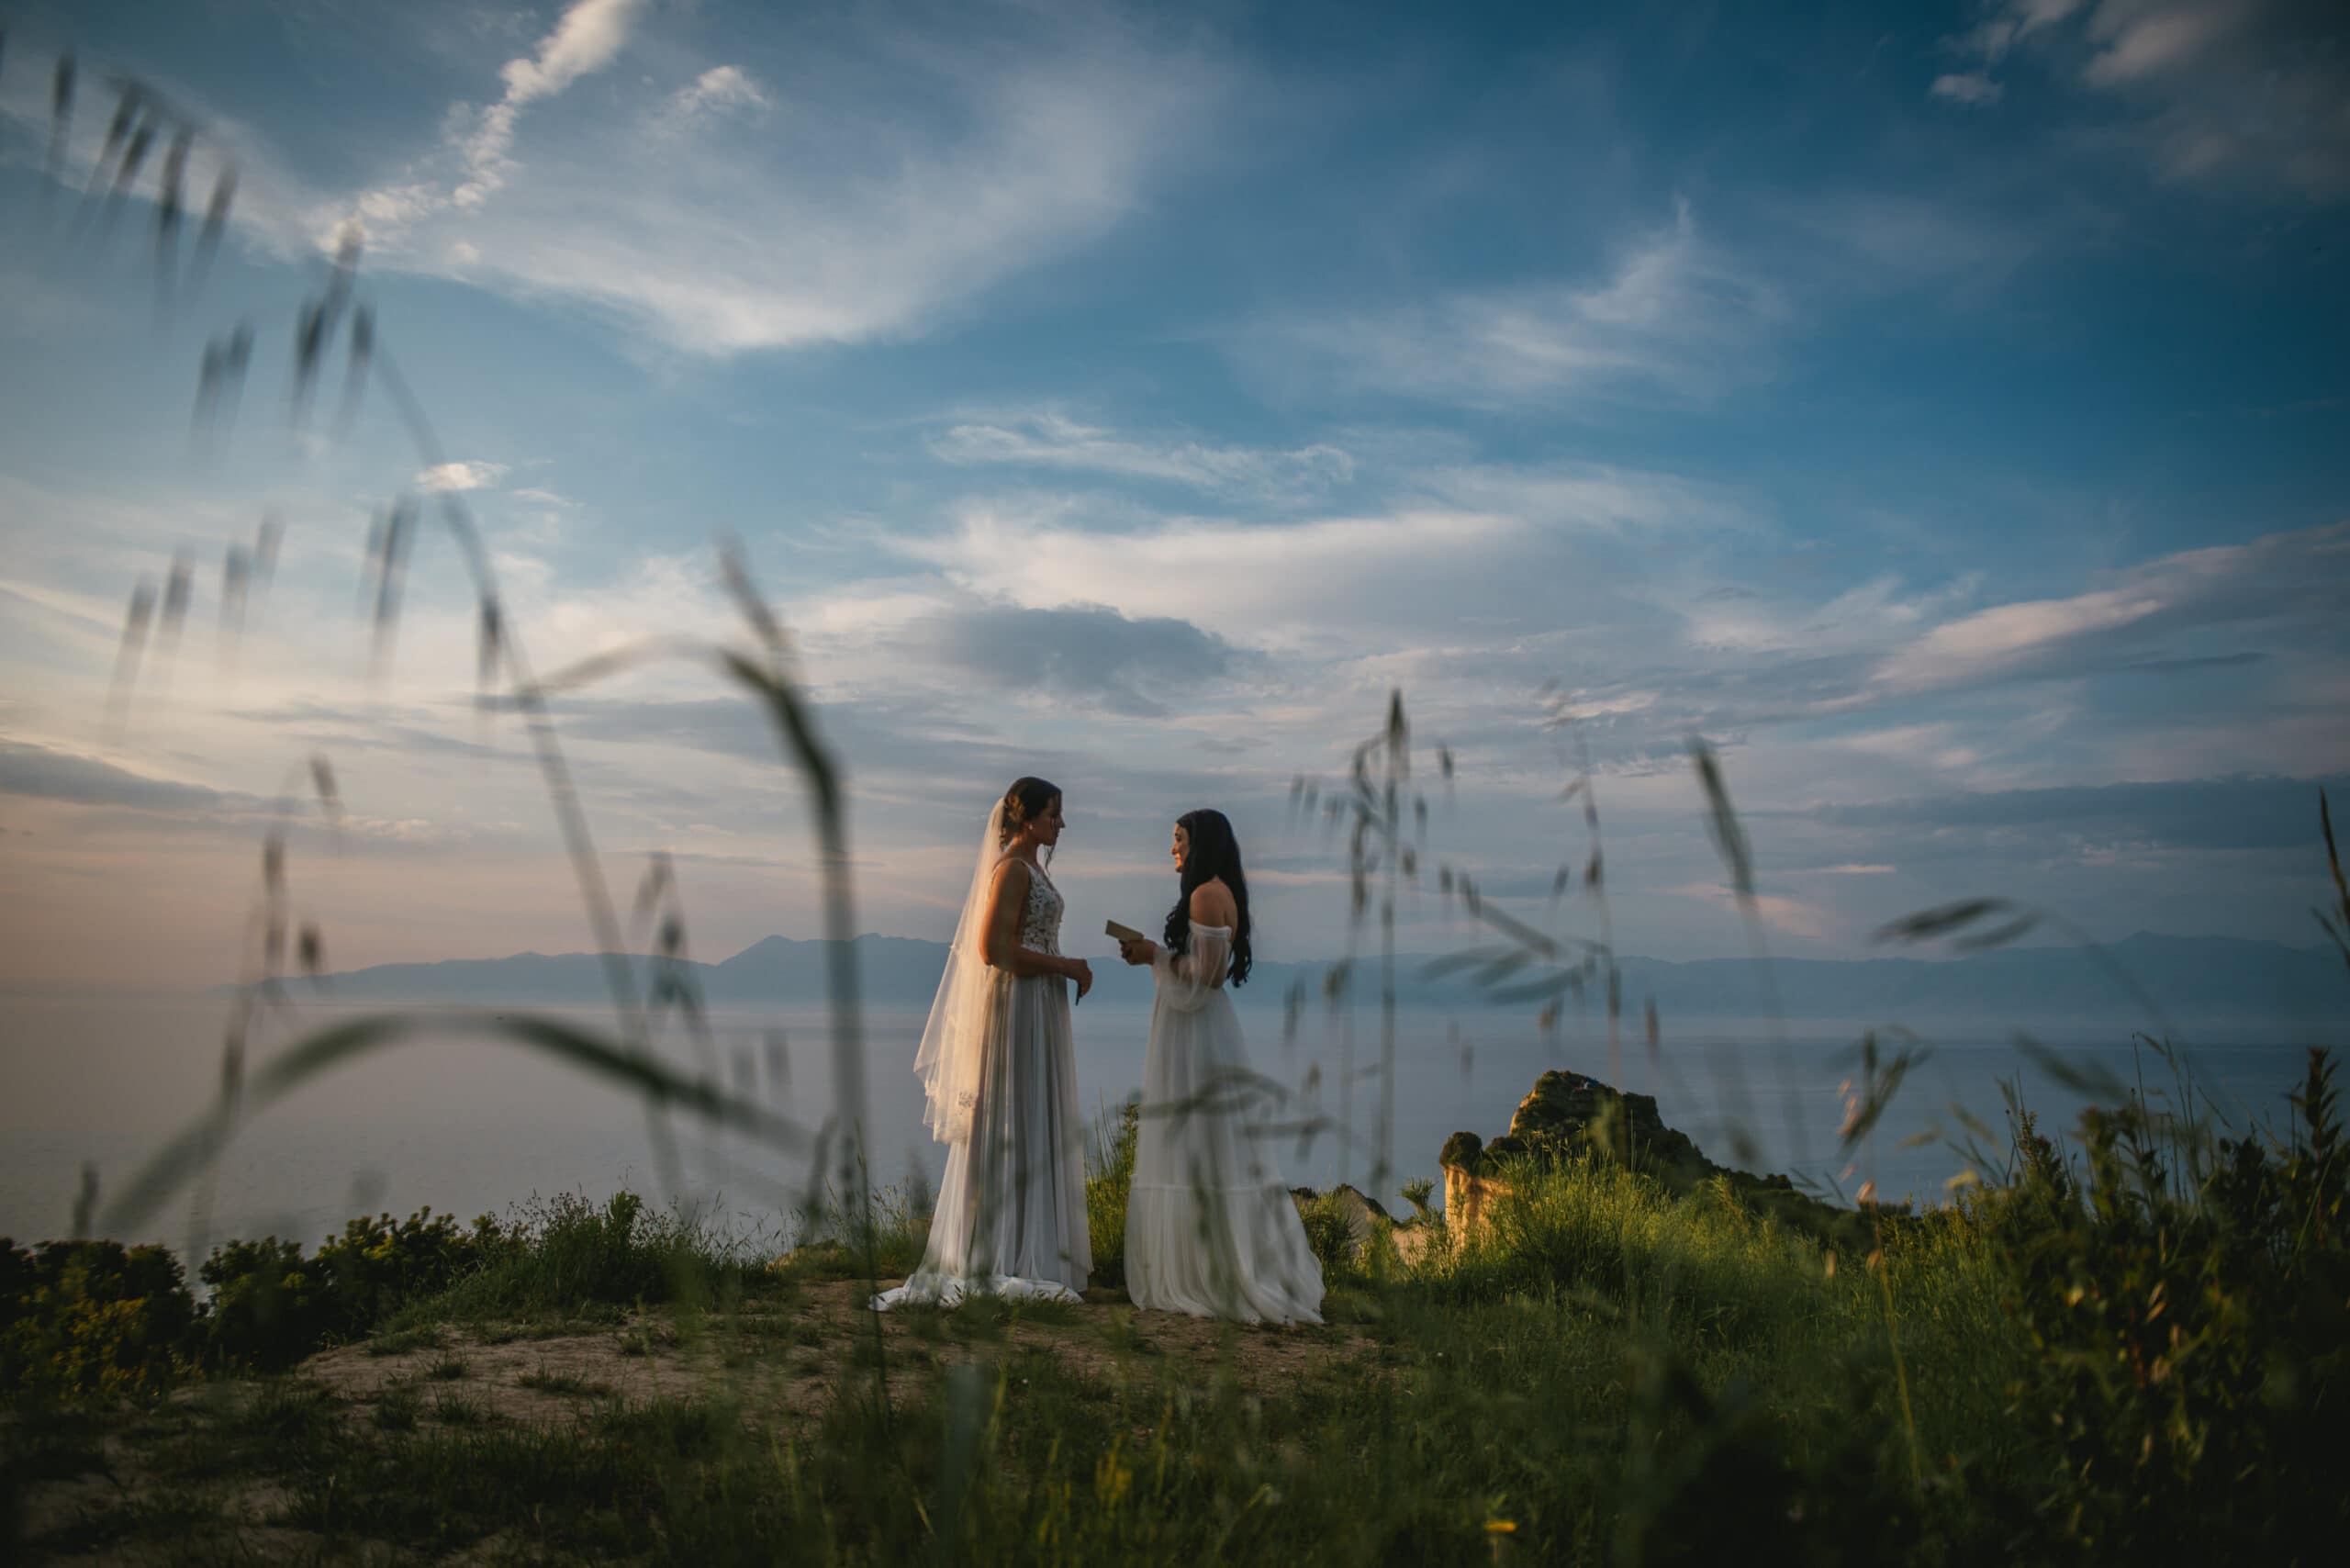 A special moment as the couple's love is celebrated in their Corfu elopement.